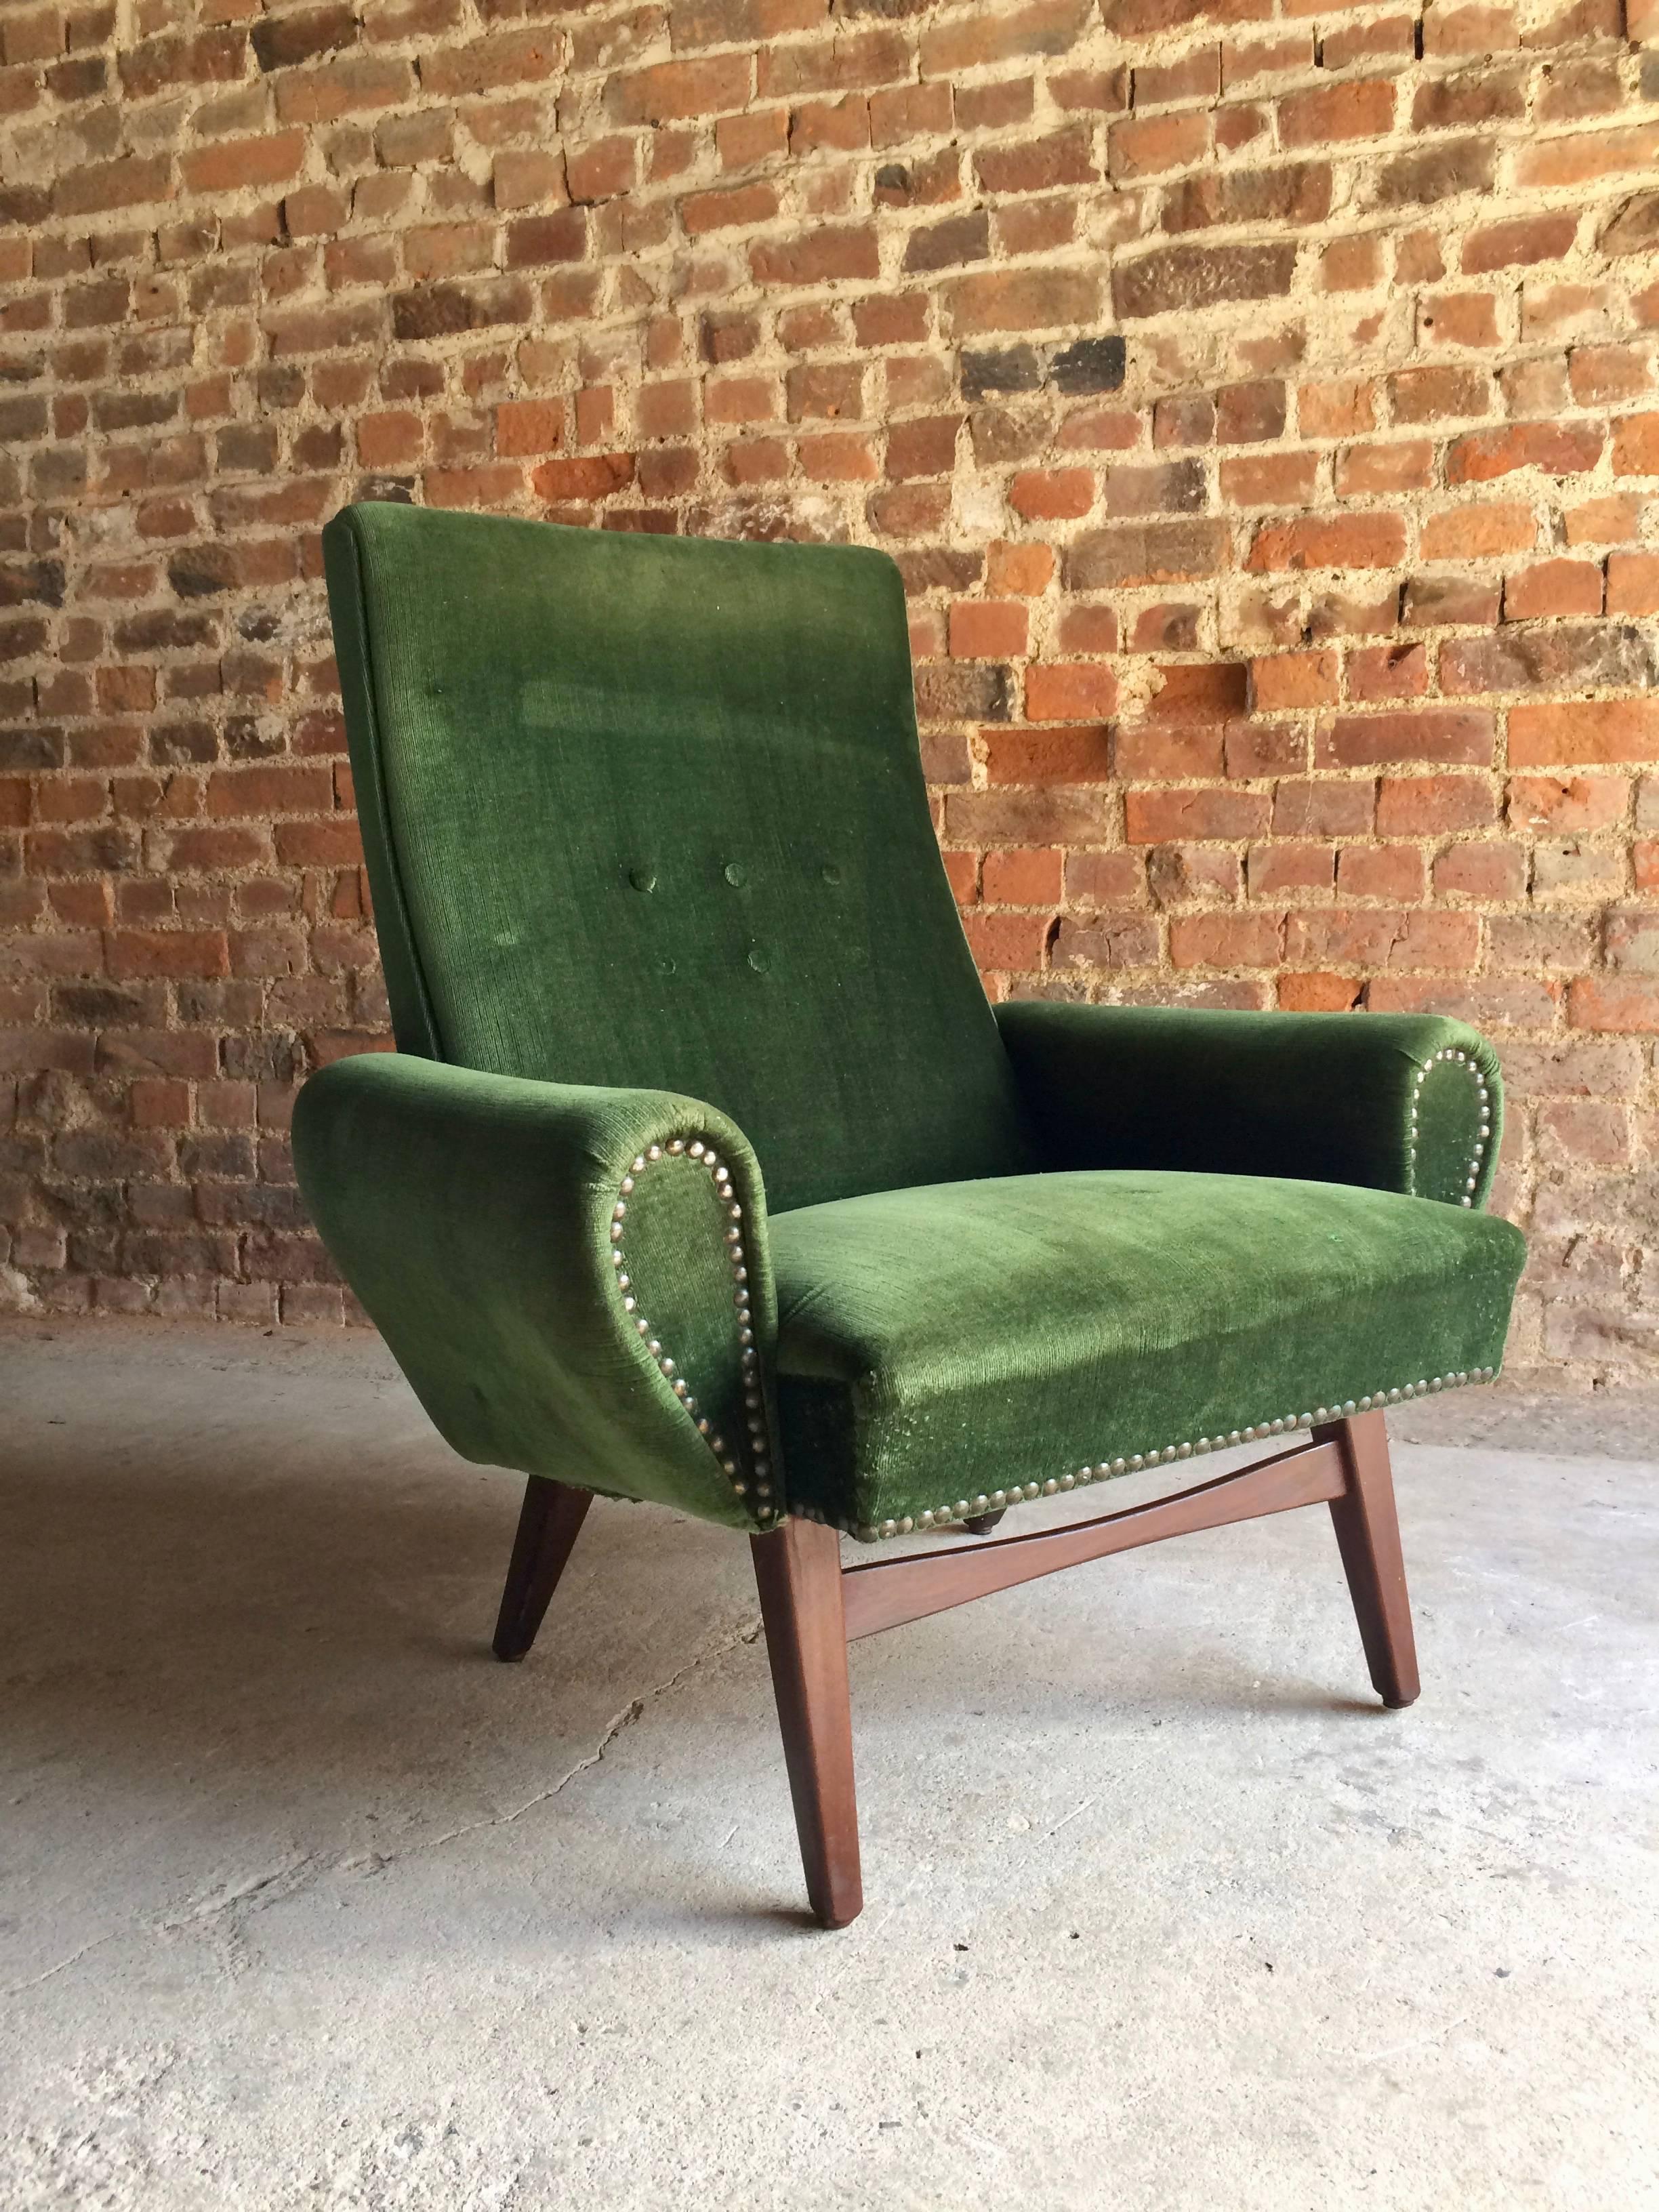 A stylish Mid-Century Danish green velour-type high back armchair on teak splayed legs, circa 1950s, legs with some minor marks and wear, upholstery faded and minor burn marks, would benefit from being reupholstered, personally I think it looks